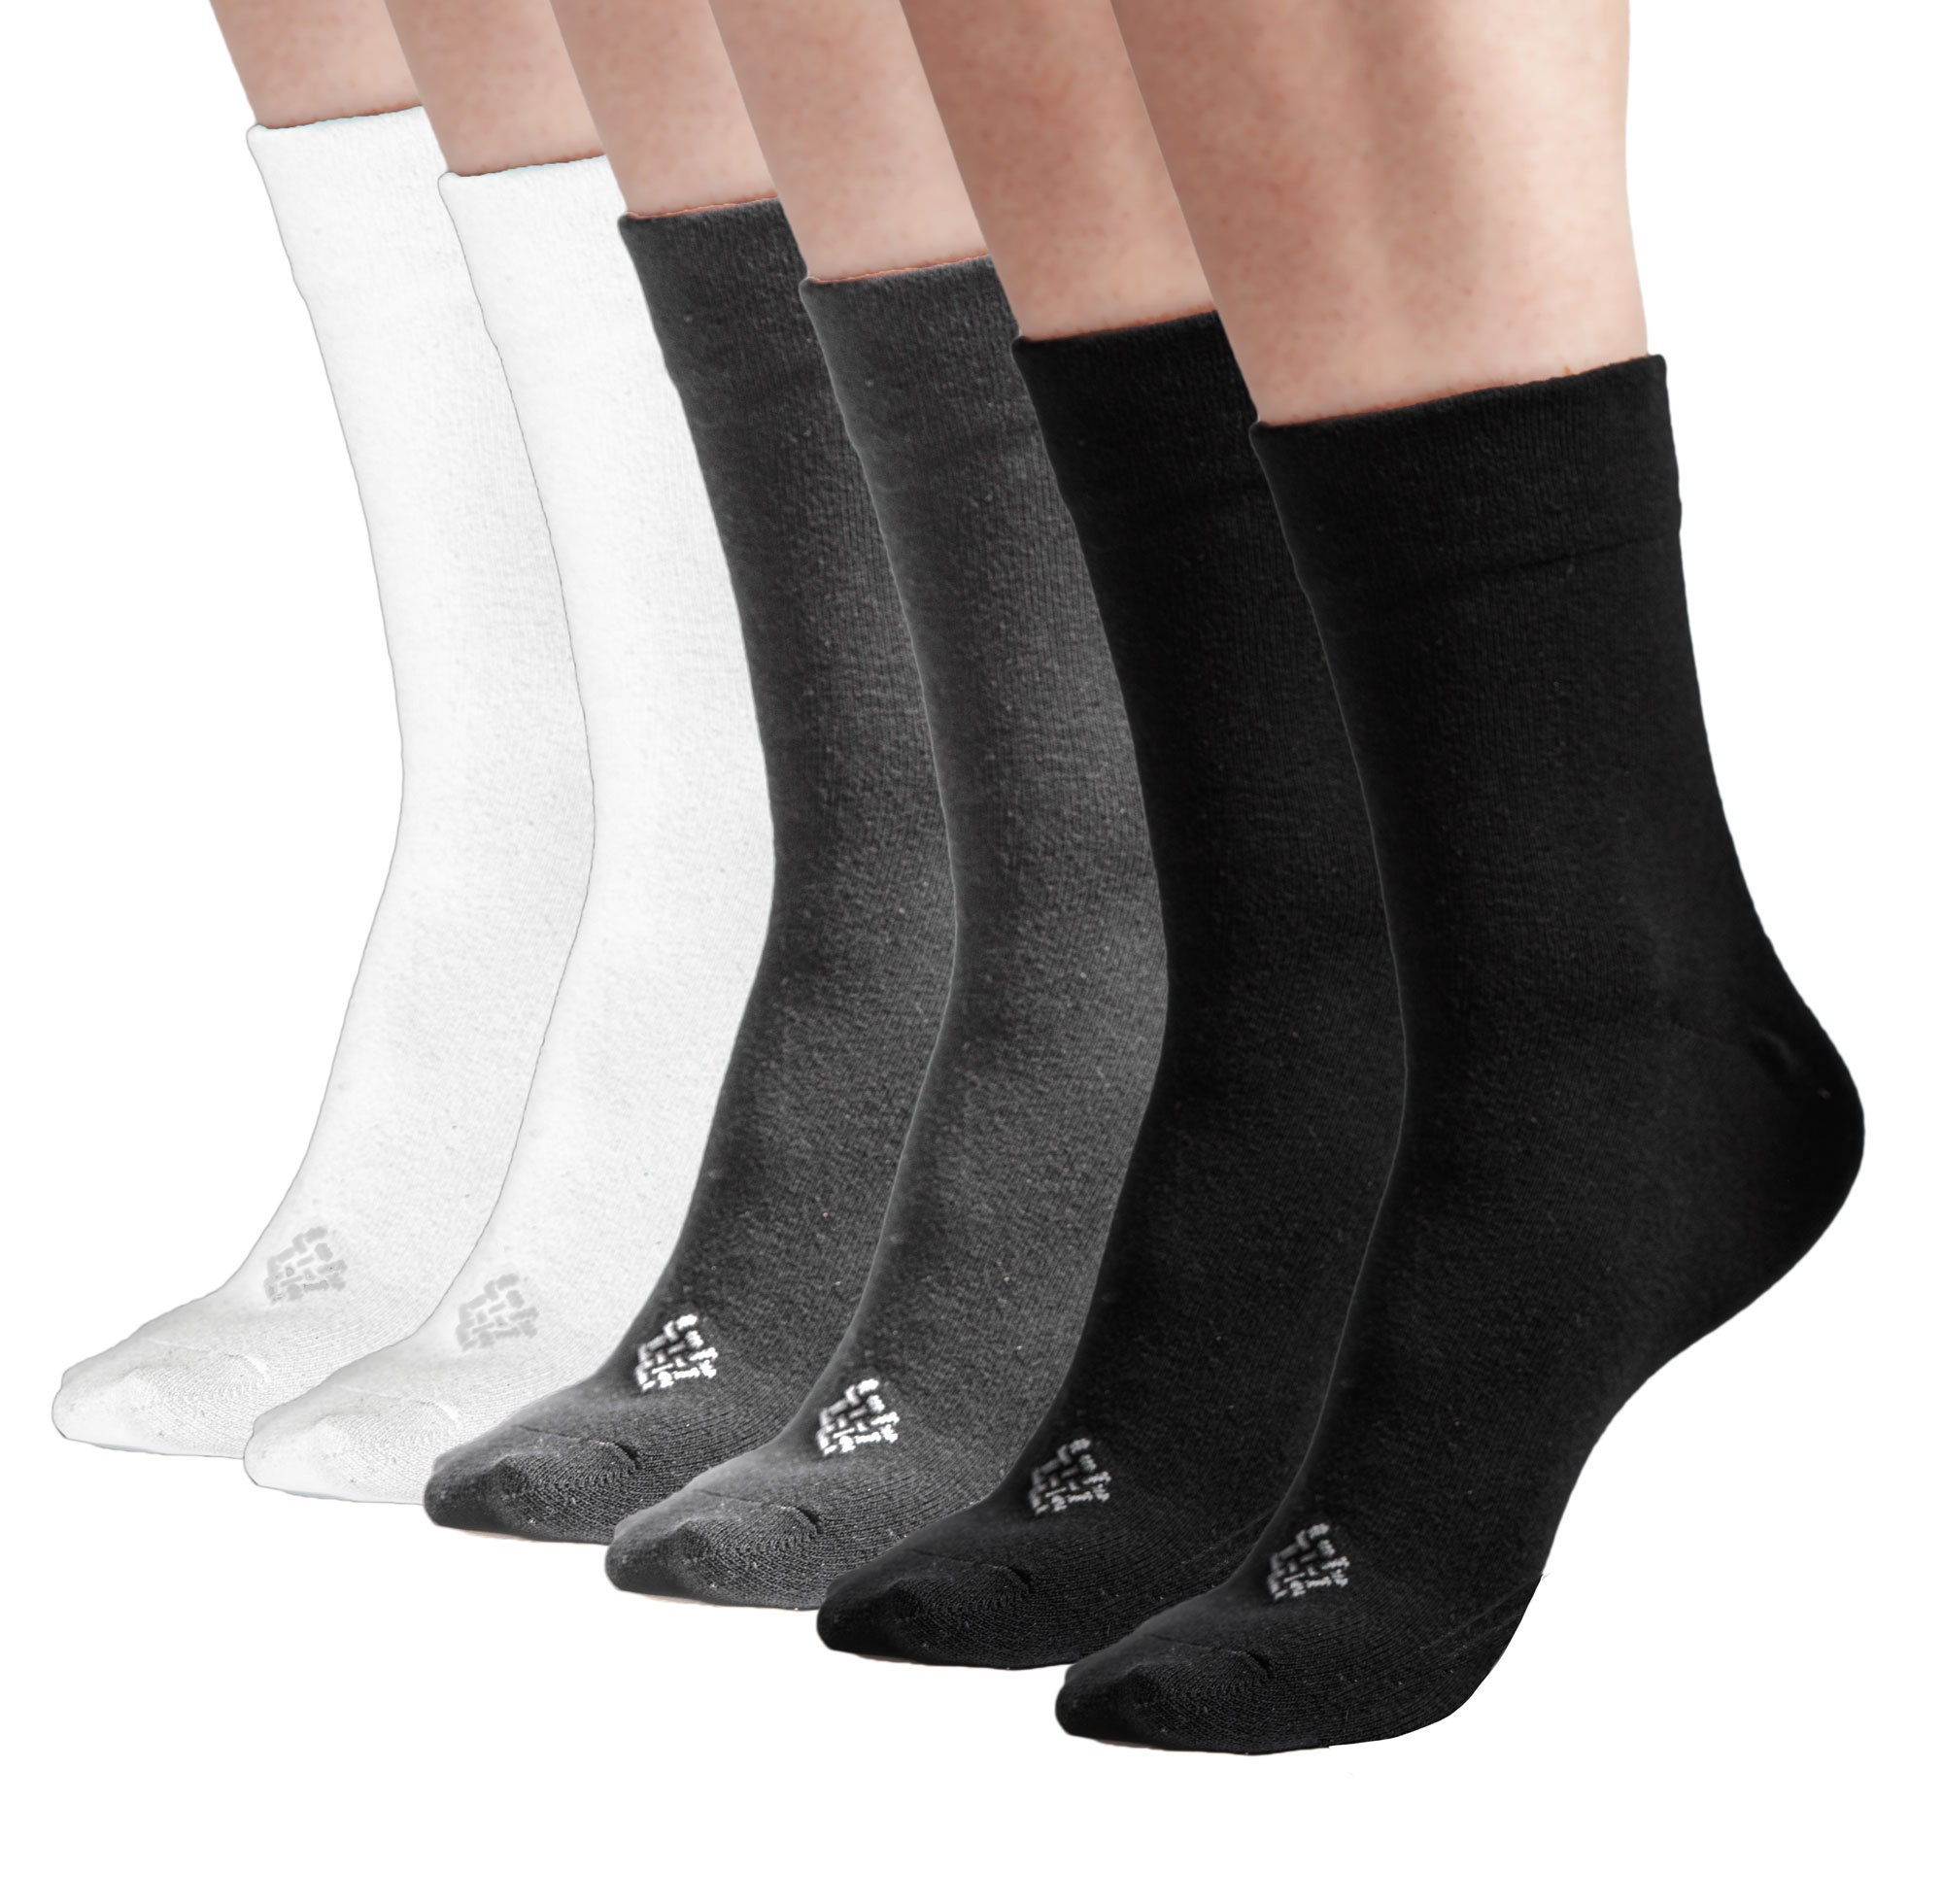 6 Pairs Unisex Natural Cotton Socks Breathable Soft Organic High